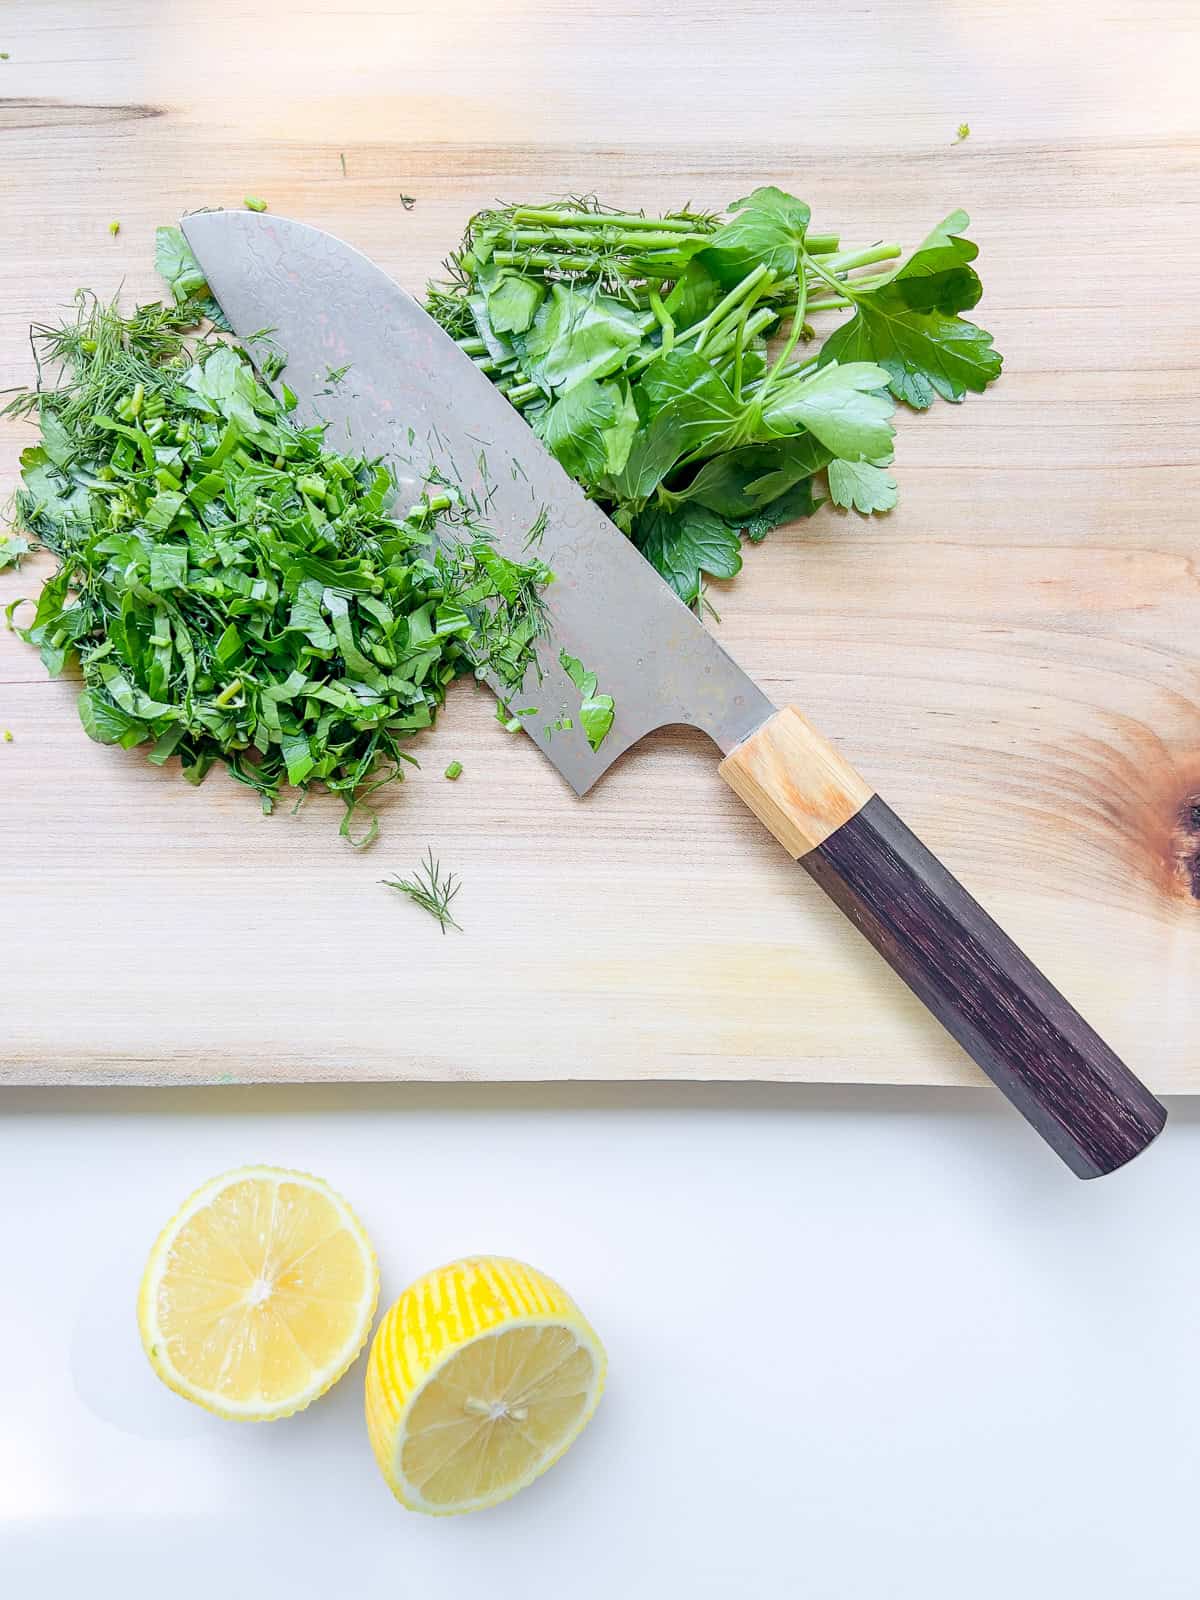 An image of cut herbs on a wooden cutting board.